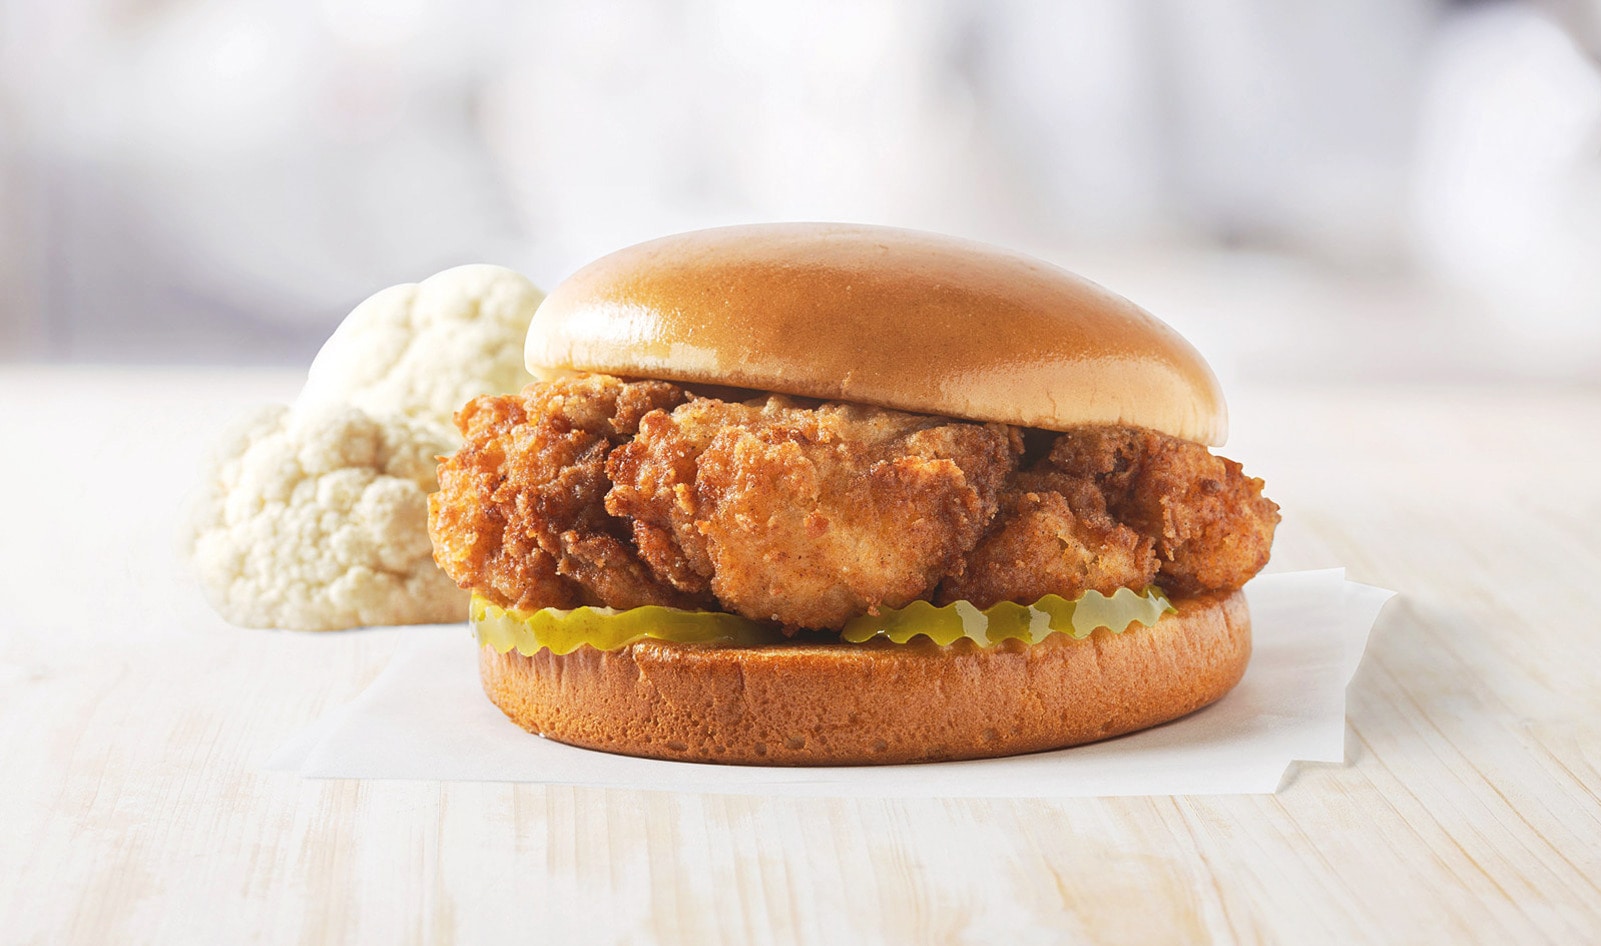 Is Chick-fil-A's Meatless Chicken Sandwich a Hit? 68 Percent of Customers Would Buy It Again